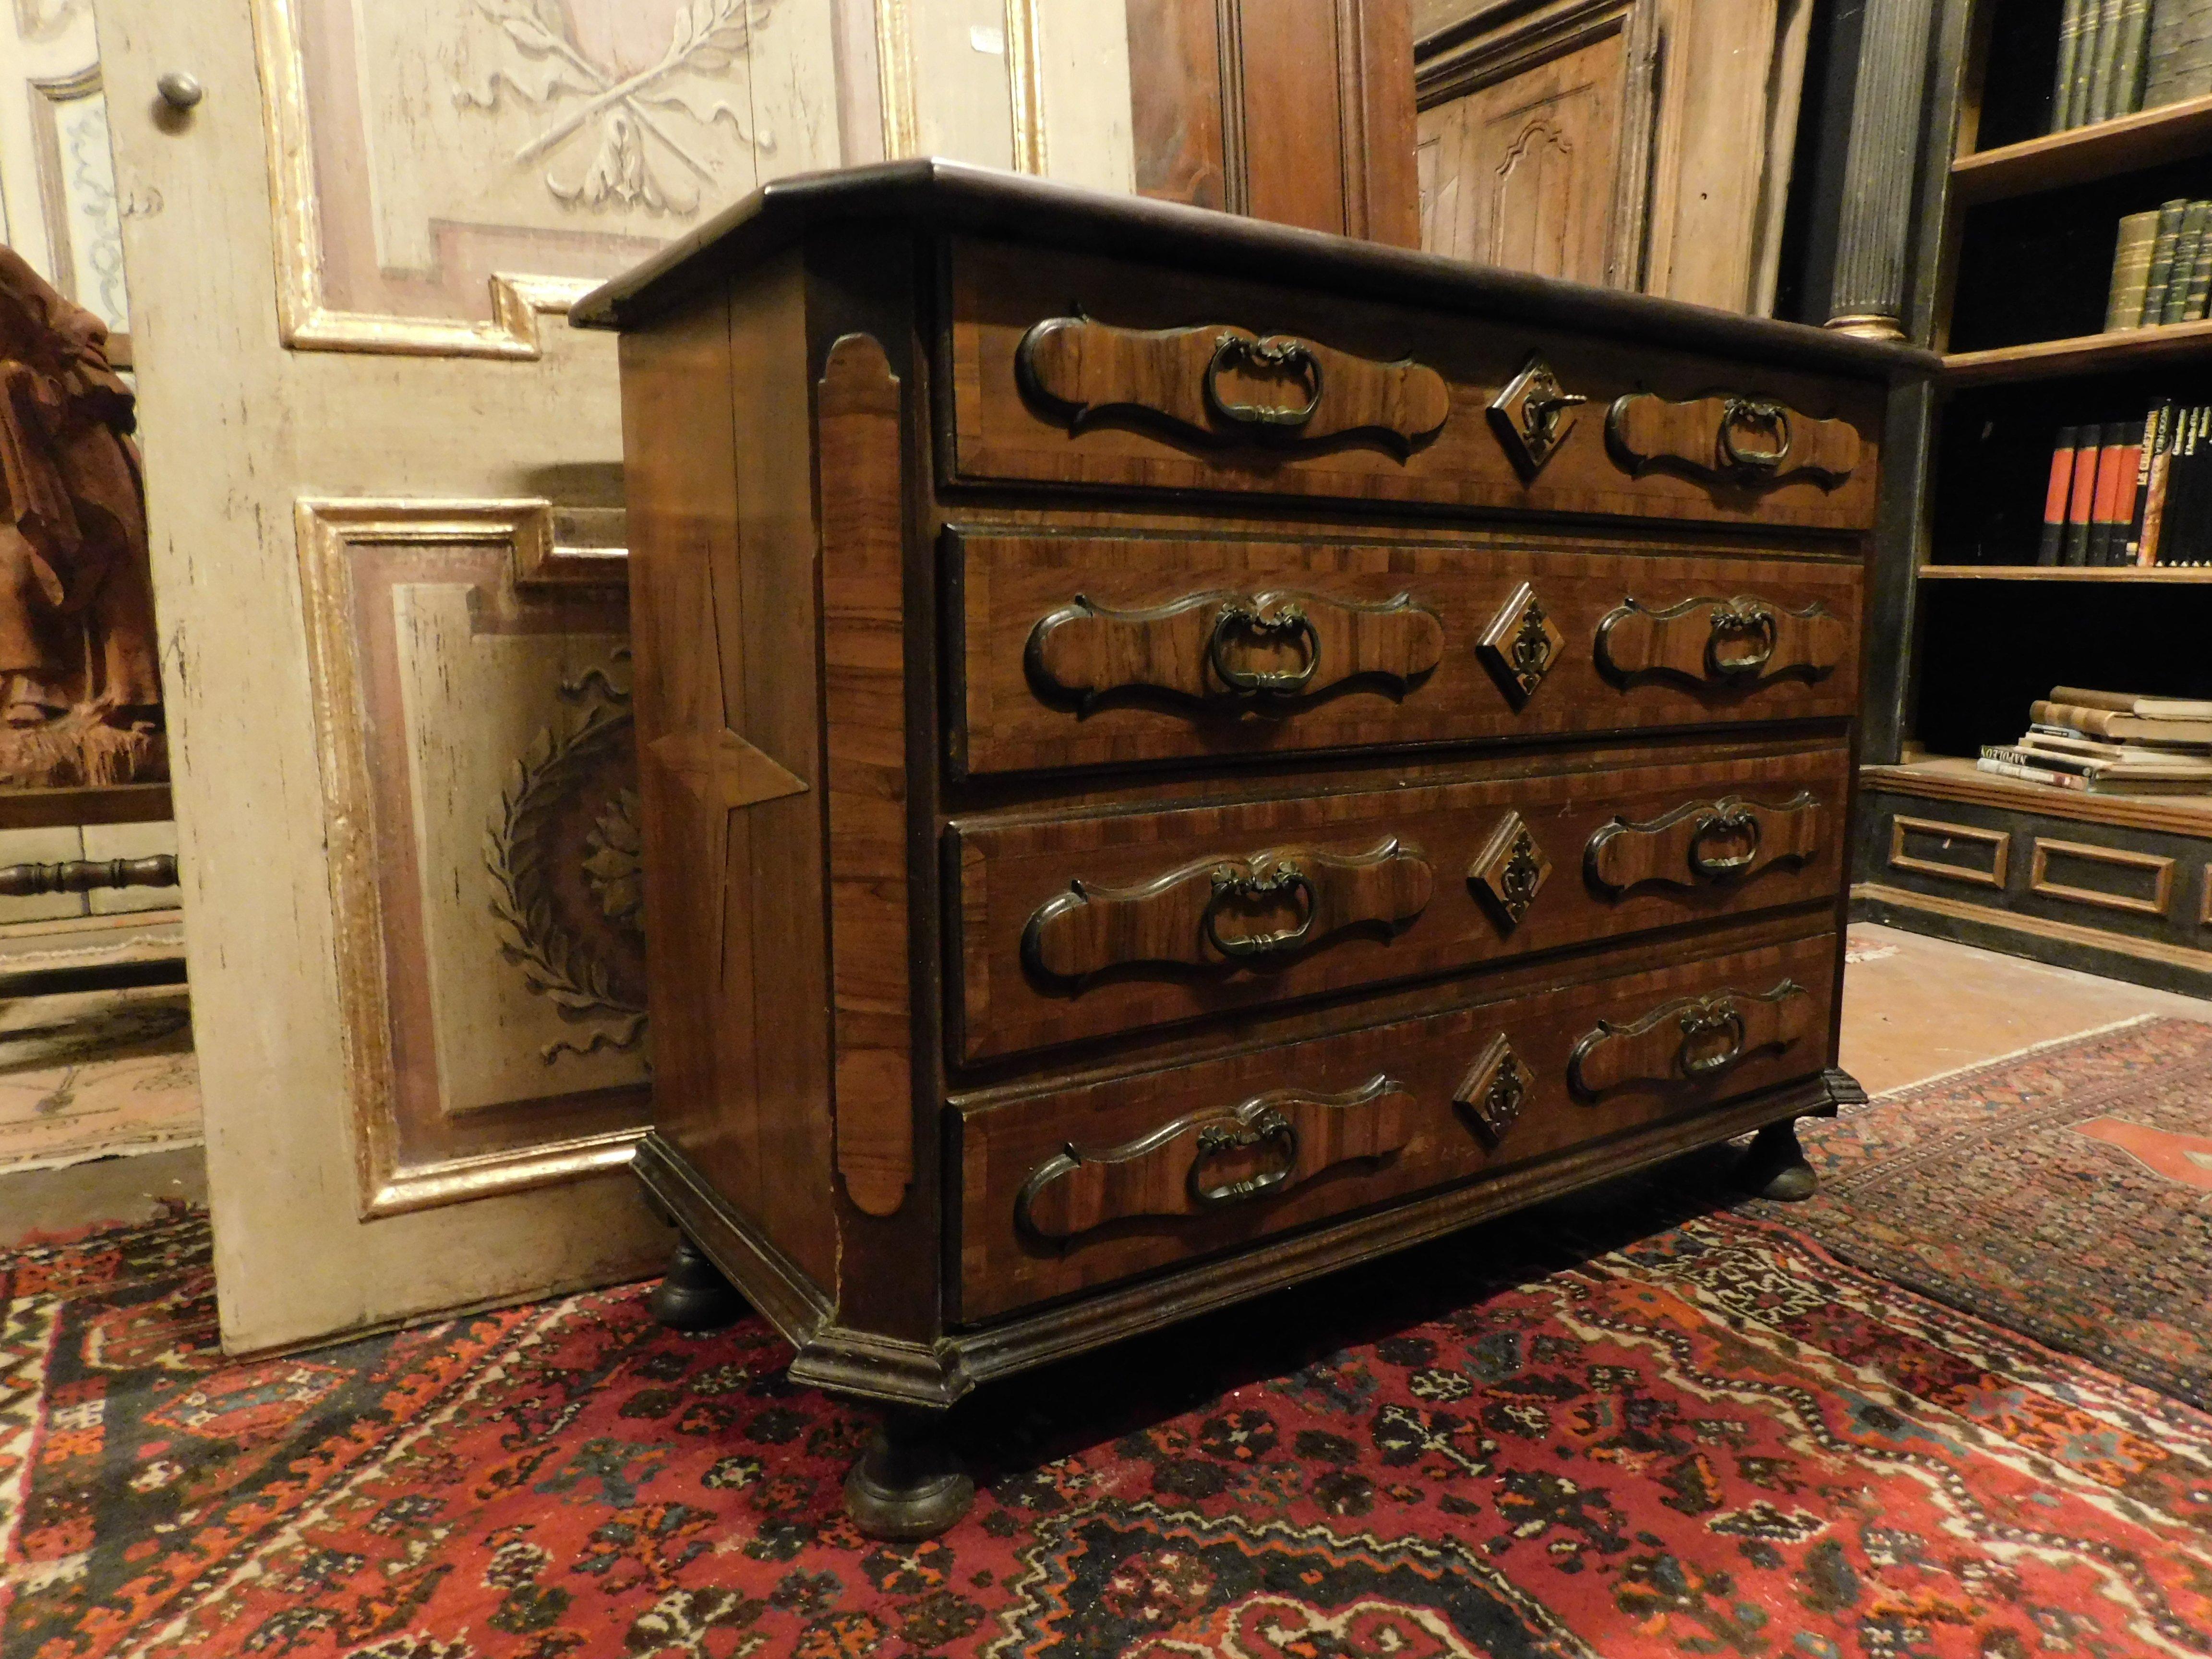 Antique commodes in walnut, chest of drawers inlaid with various woods and briar, with 4 large drawers, also decorated on the sides, hand-built in the 18th century, in Italy, ideal in a period house or even in modern interiors in contrast, gives